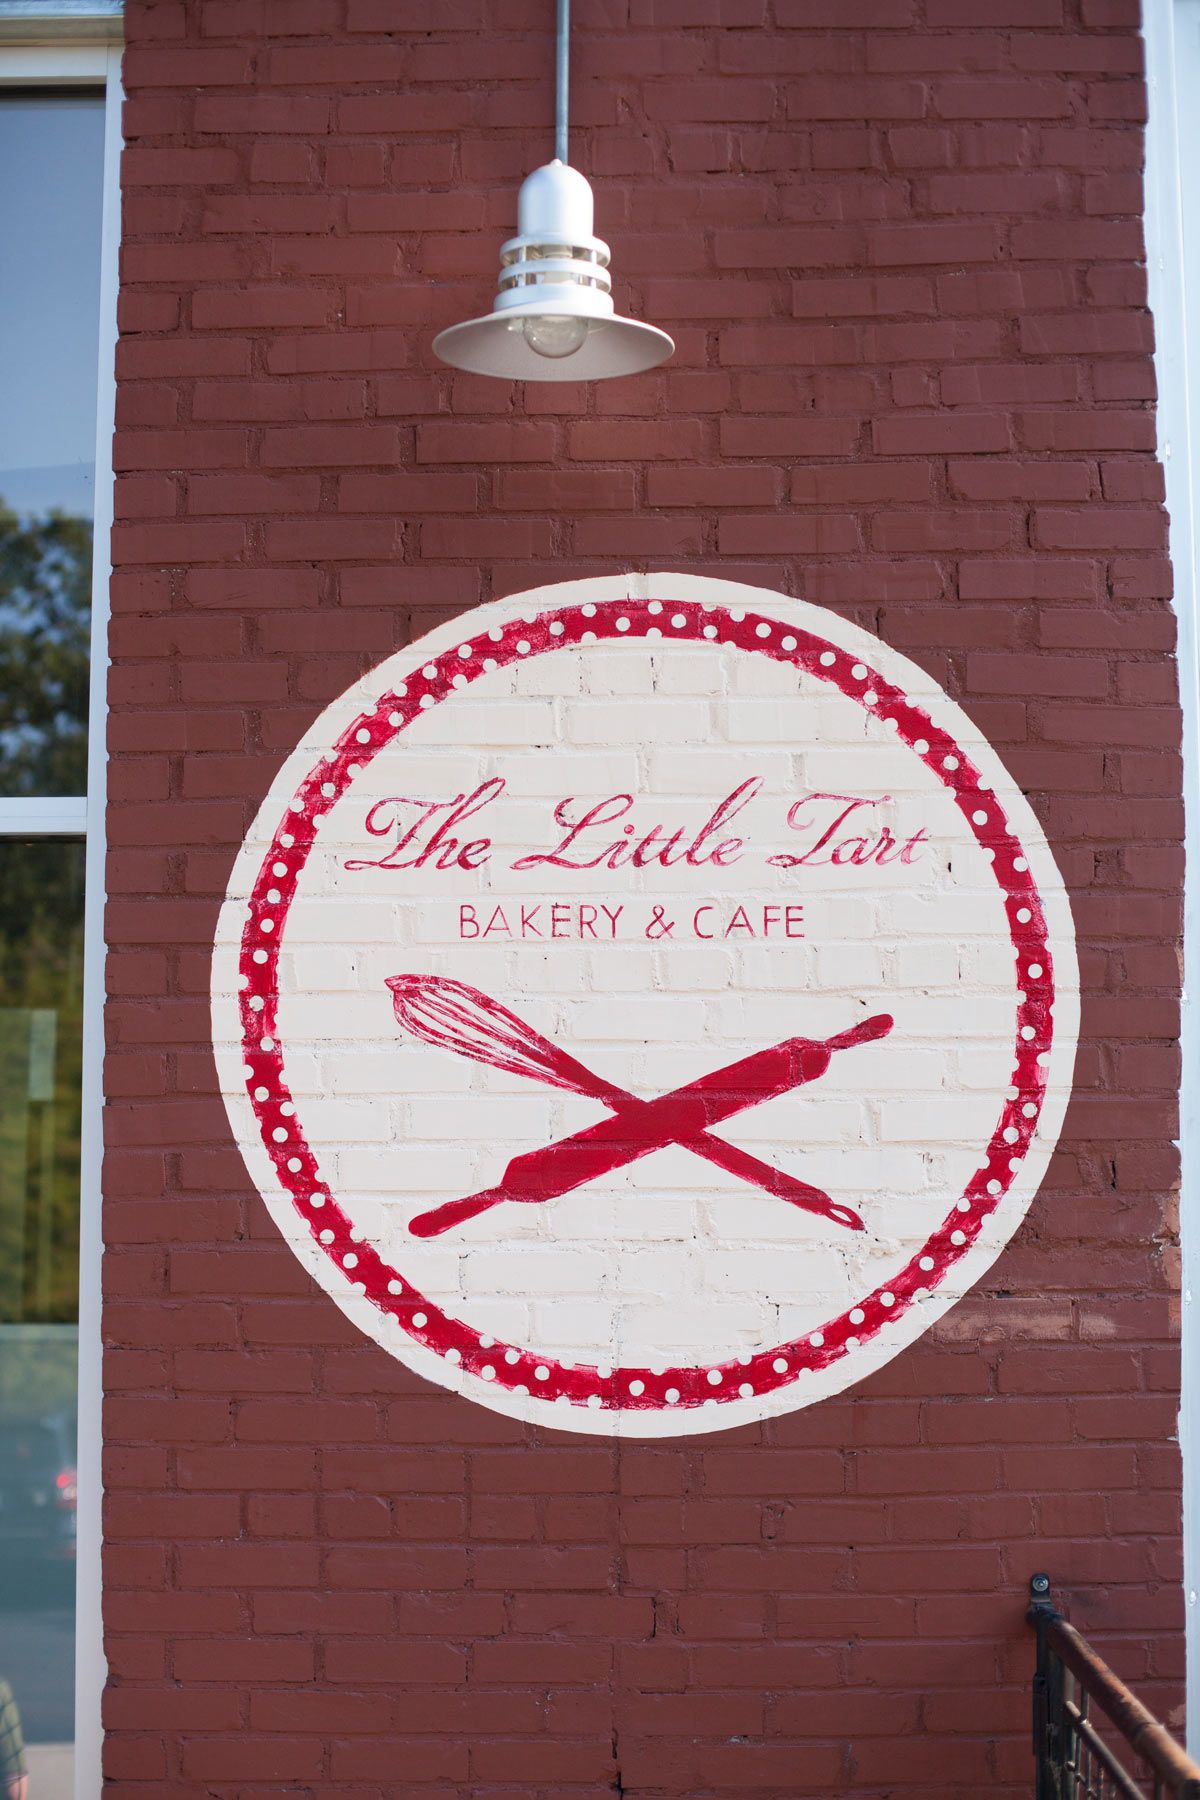 Octane Coffee and The Little Tart Bakeshop